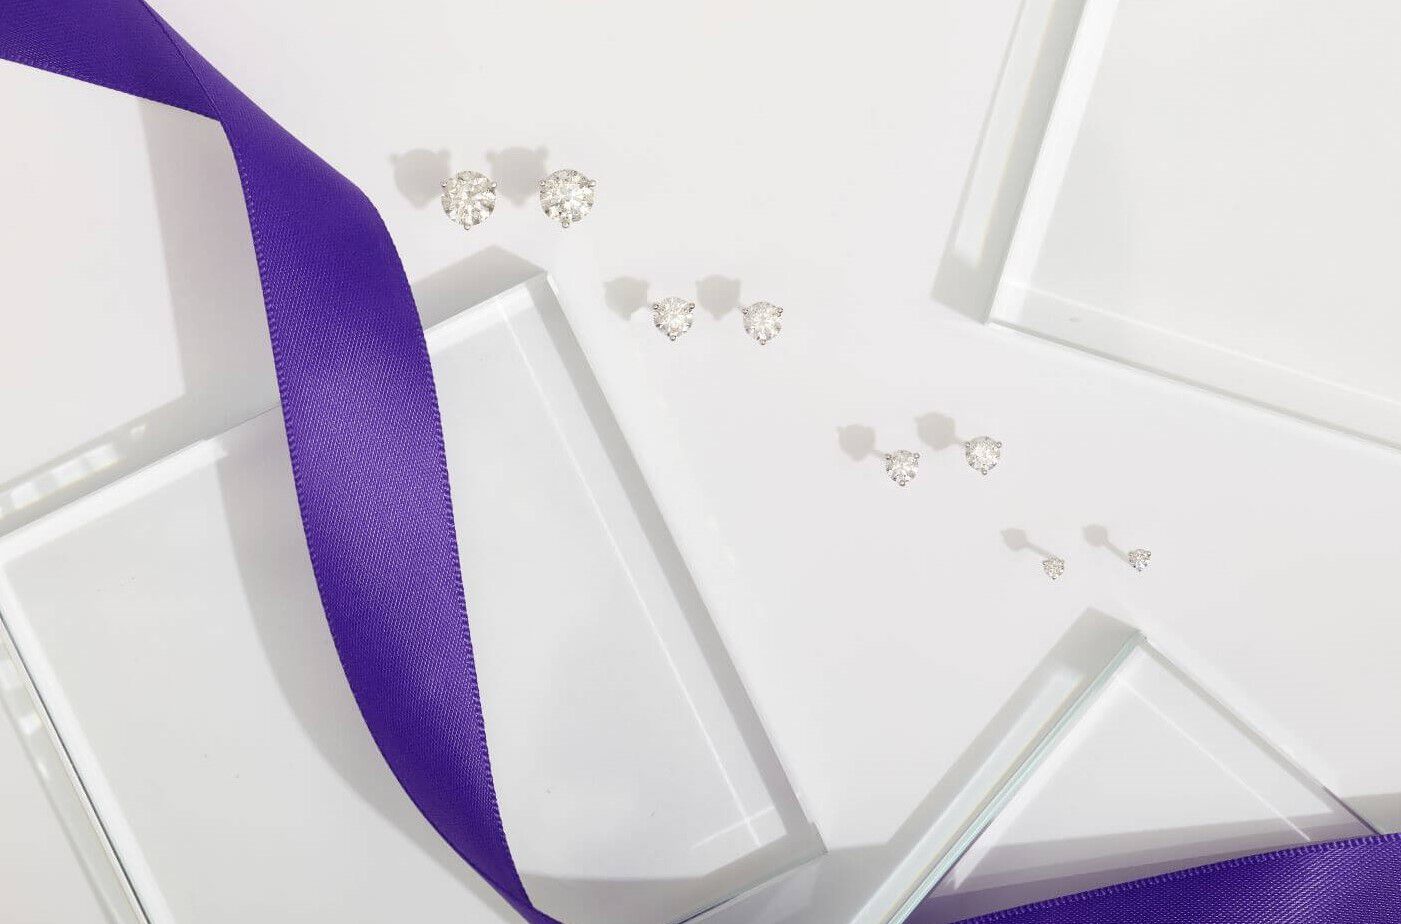 Diamond stud earring in various sizes against a while background with a flowing purple ribbon 